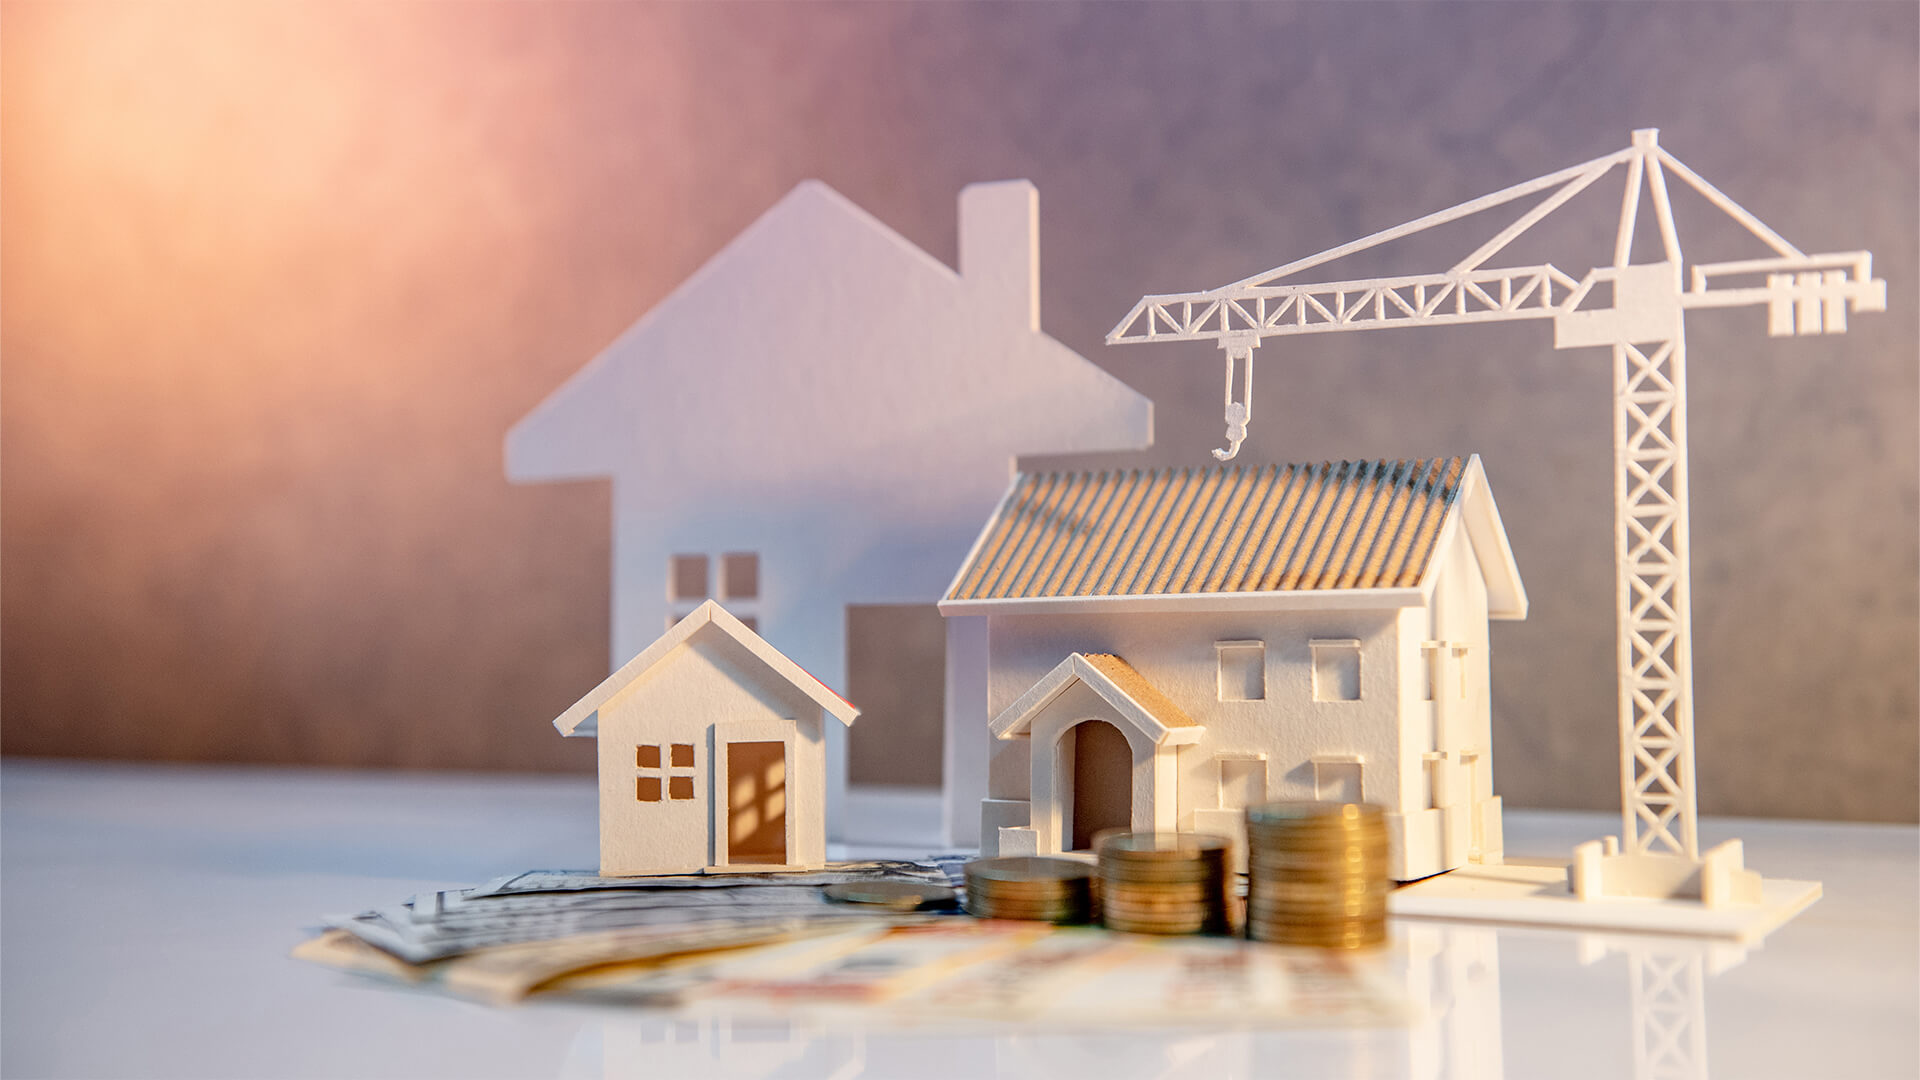 Model of houses, a crane, and money